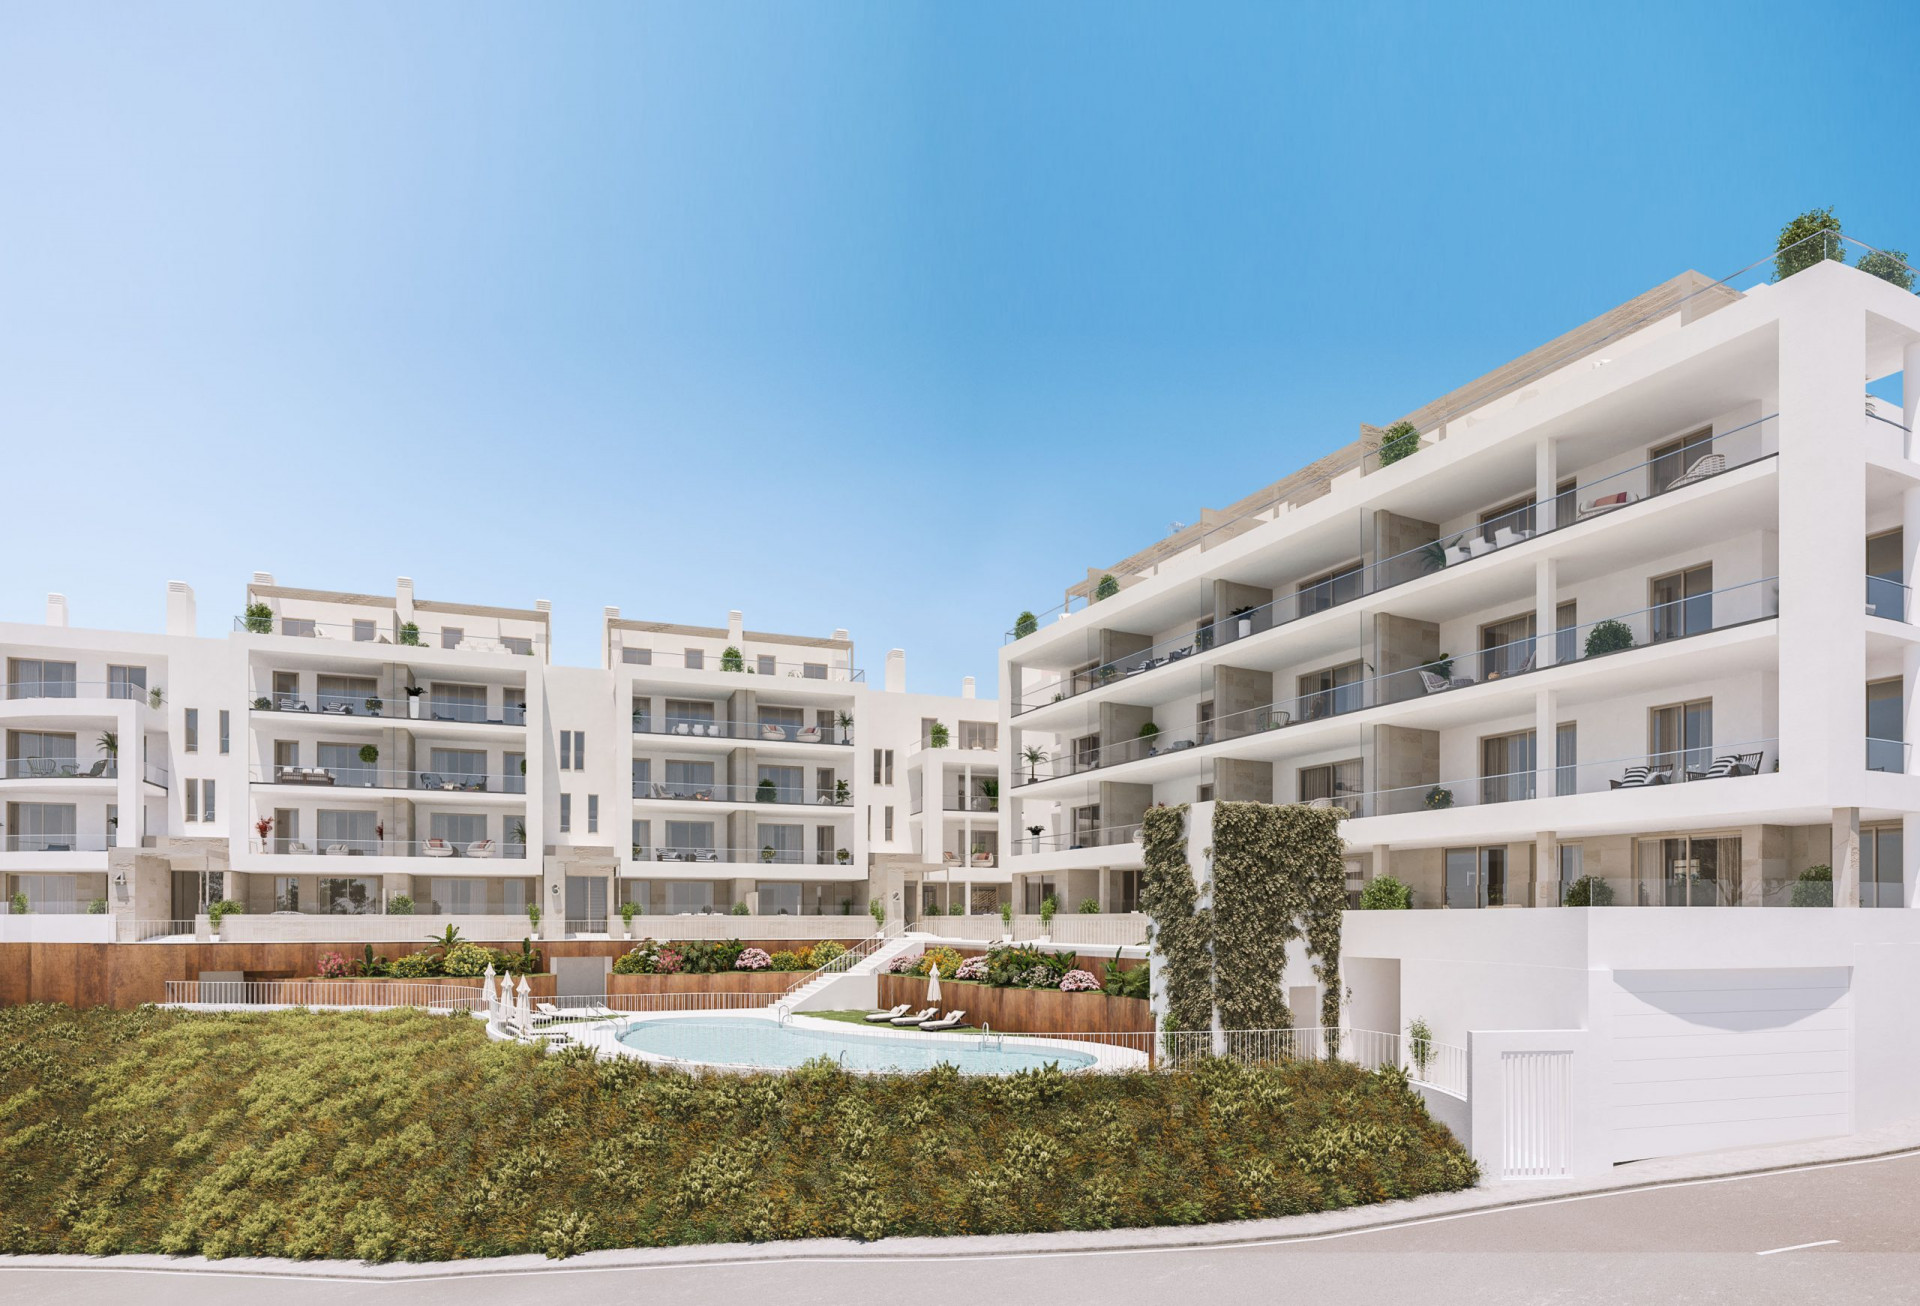 Sea Blue: Residential complex of 47 apartments and penthouses with views to the coast of Torrox.